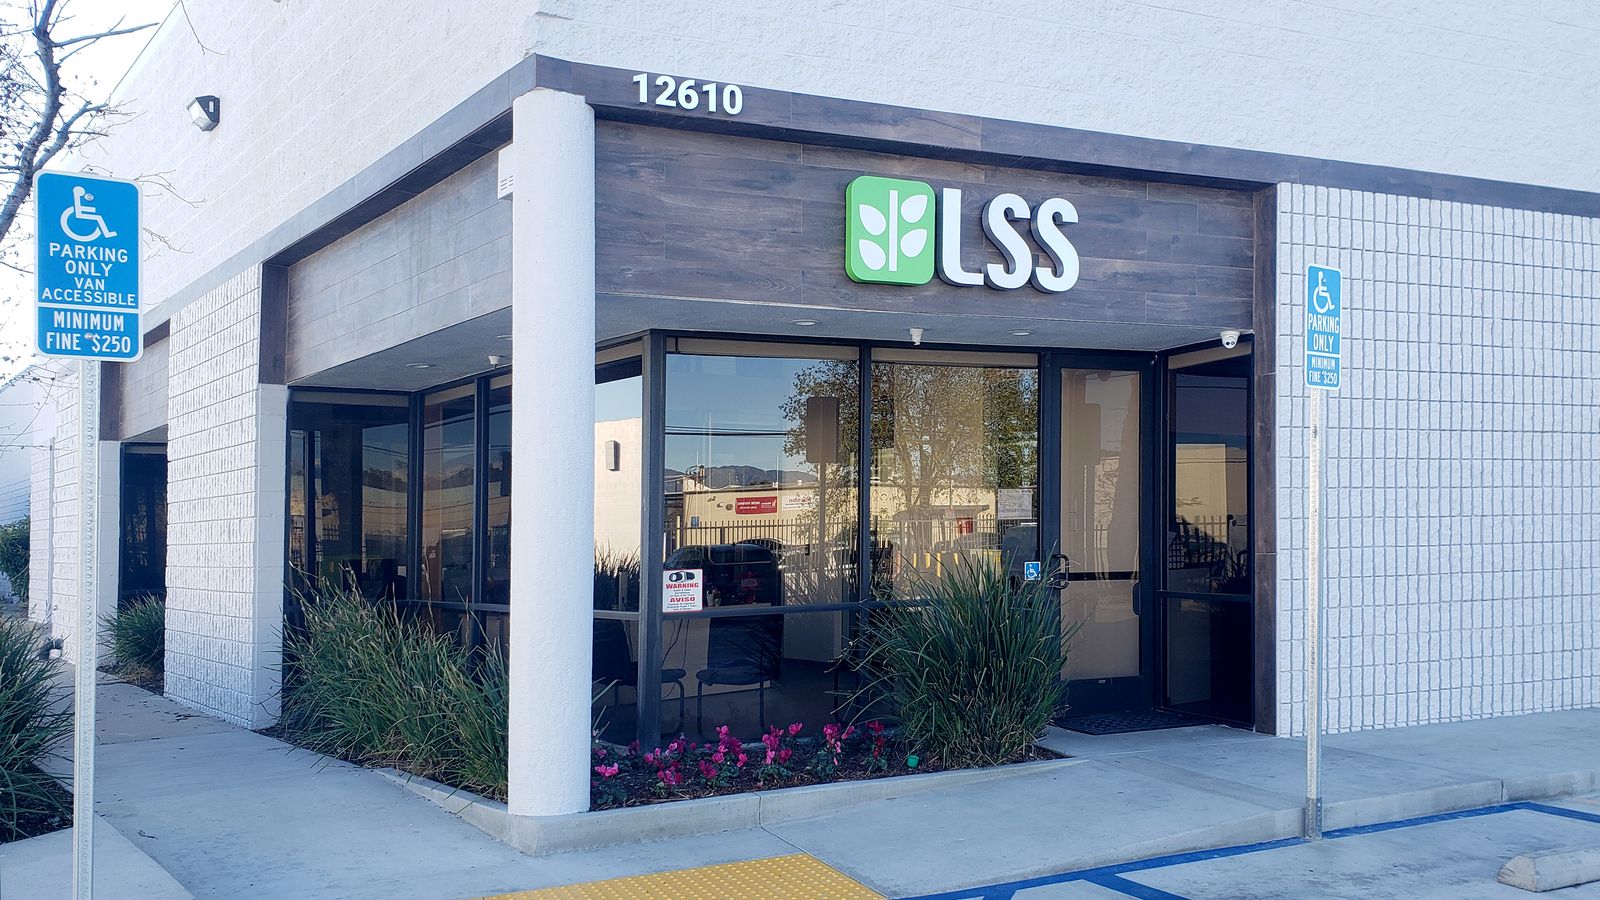 LSS light box logo sign in green and white colors made of aluminum and acrylic for branding